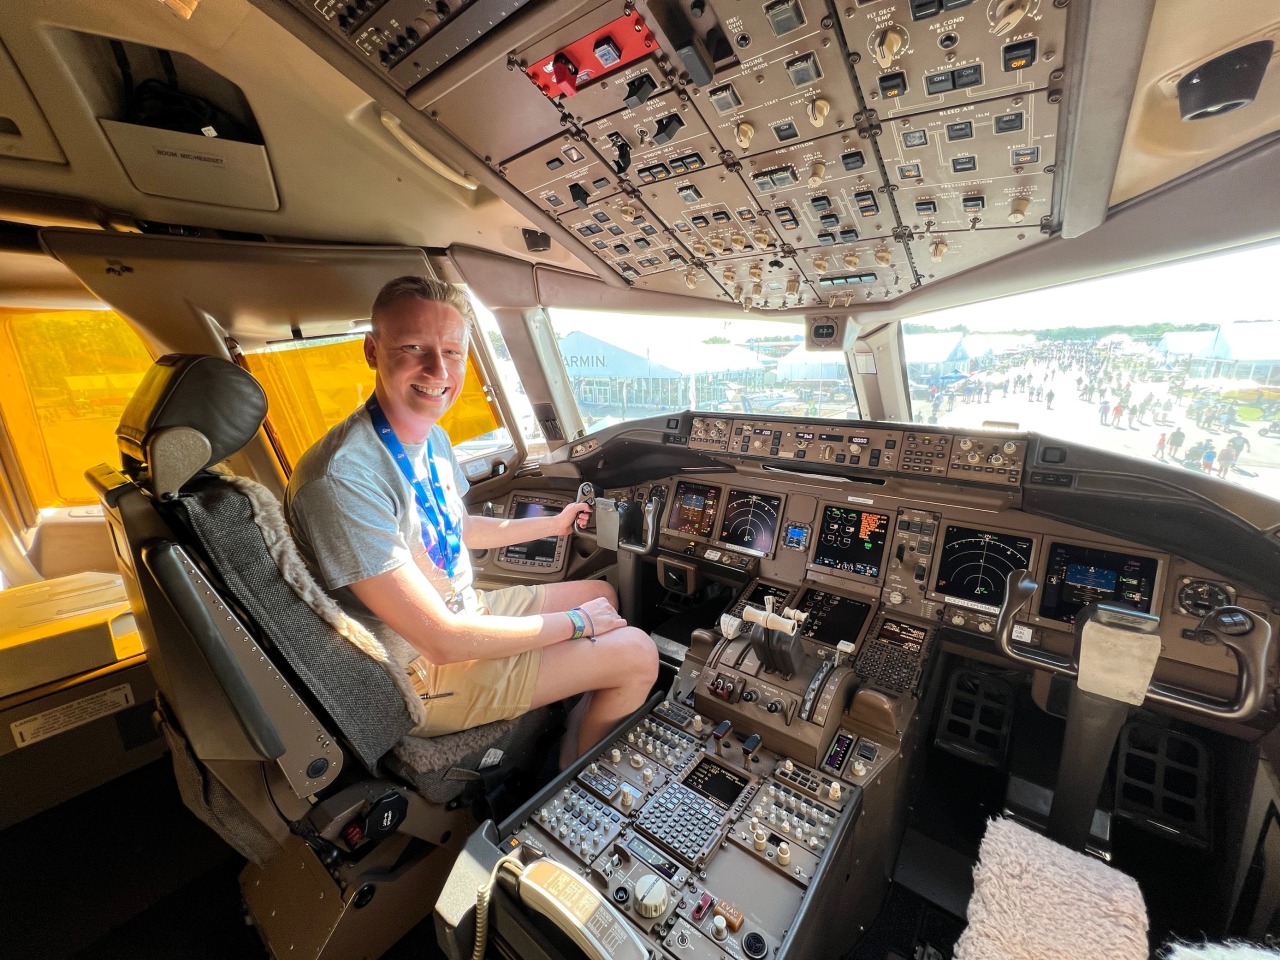 A man wearing a NASA t-shirt sits in a plane cockpit. The cockpit is a metallic grey and covered in hundreds of knobs, throttles, and buttons with two large windows looking forward towards the nose of the plane.